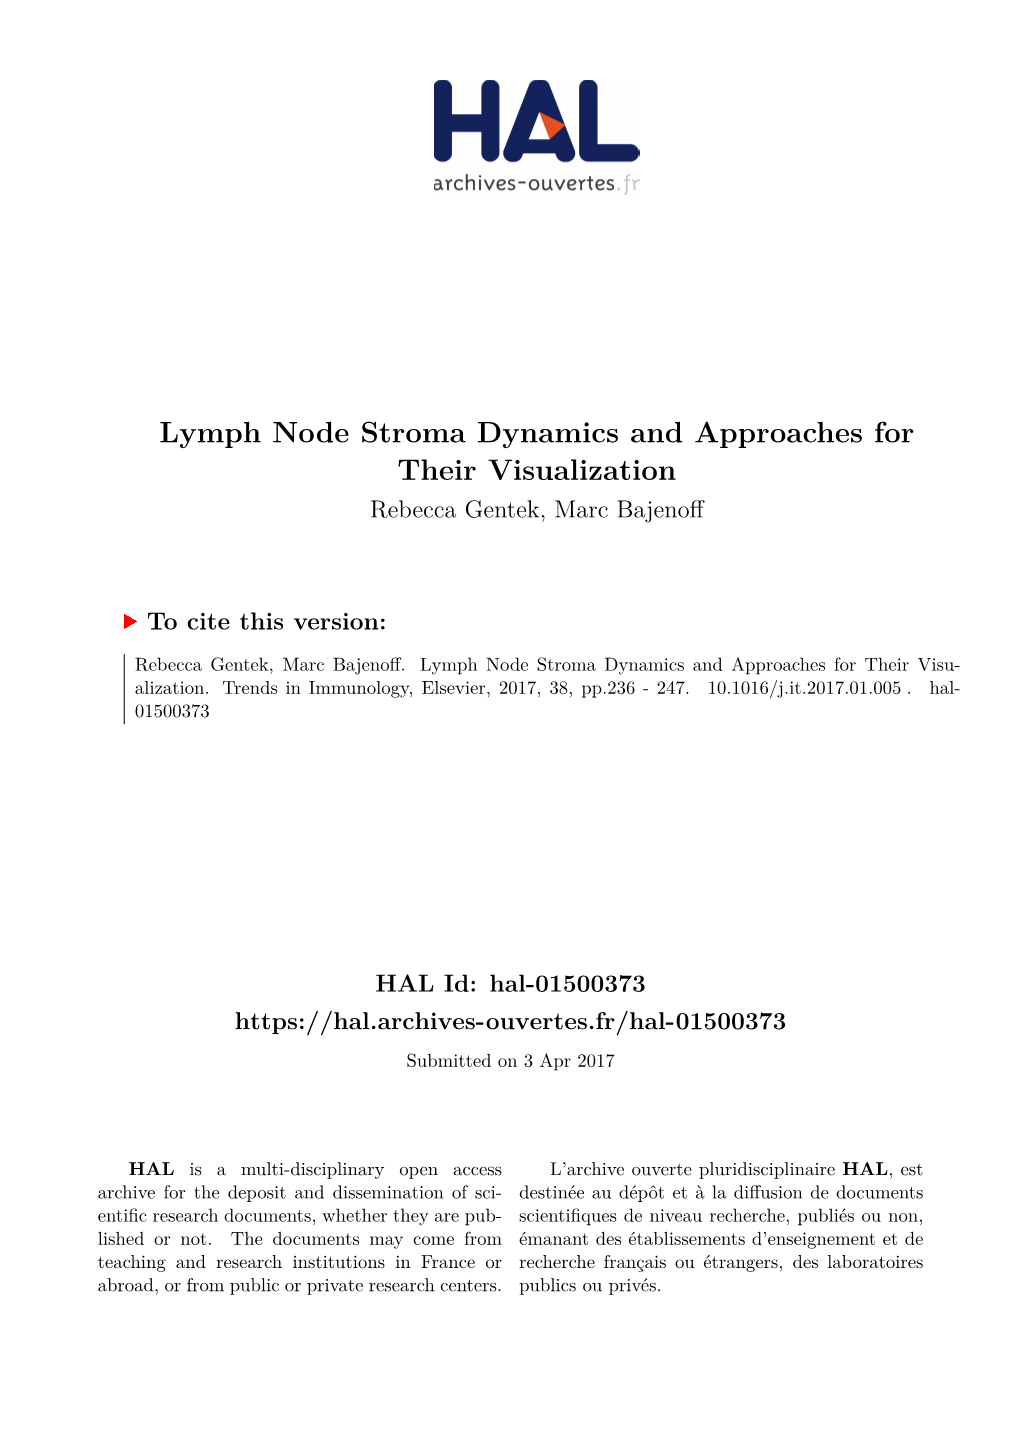 Lymph Node Stroma Dynamics and Approaches for Their Visualization Rebecca Gentek, Marc Bajenoff